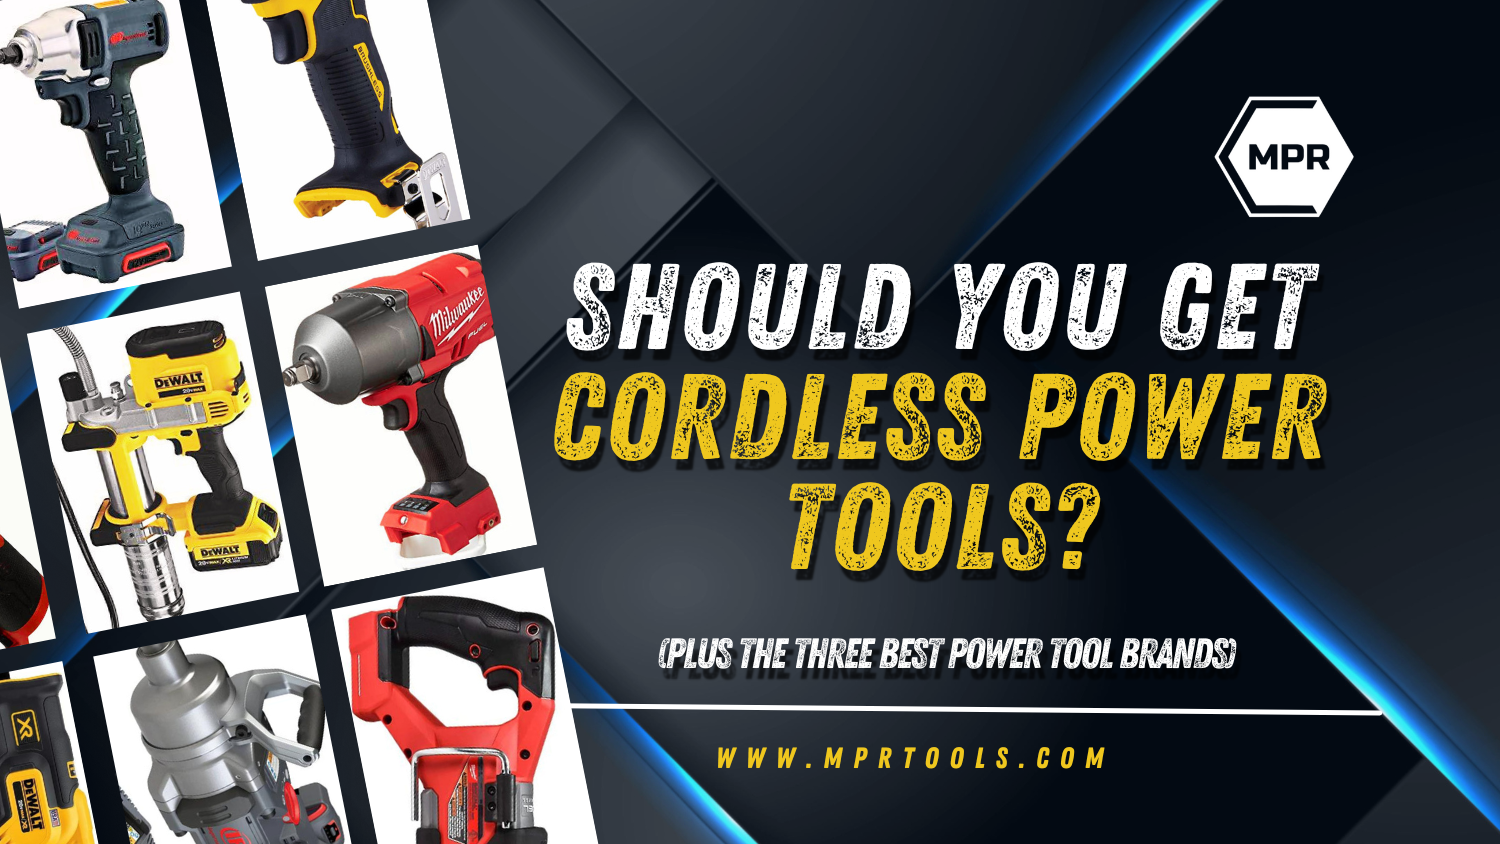 Should You Get Cordless Power Tools? (Plus the 3 Best Power Tool Brands)